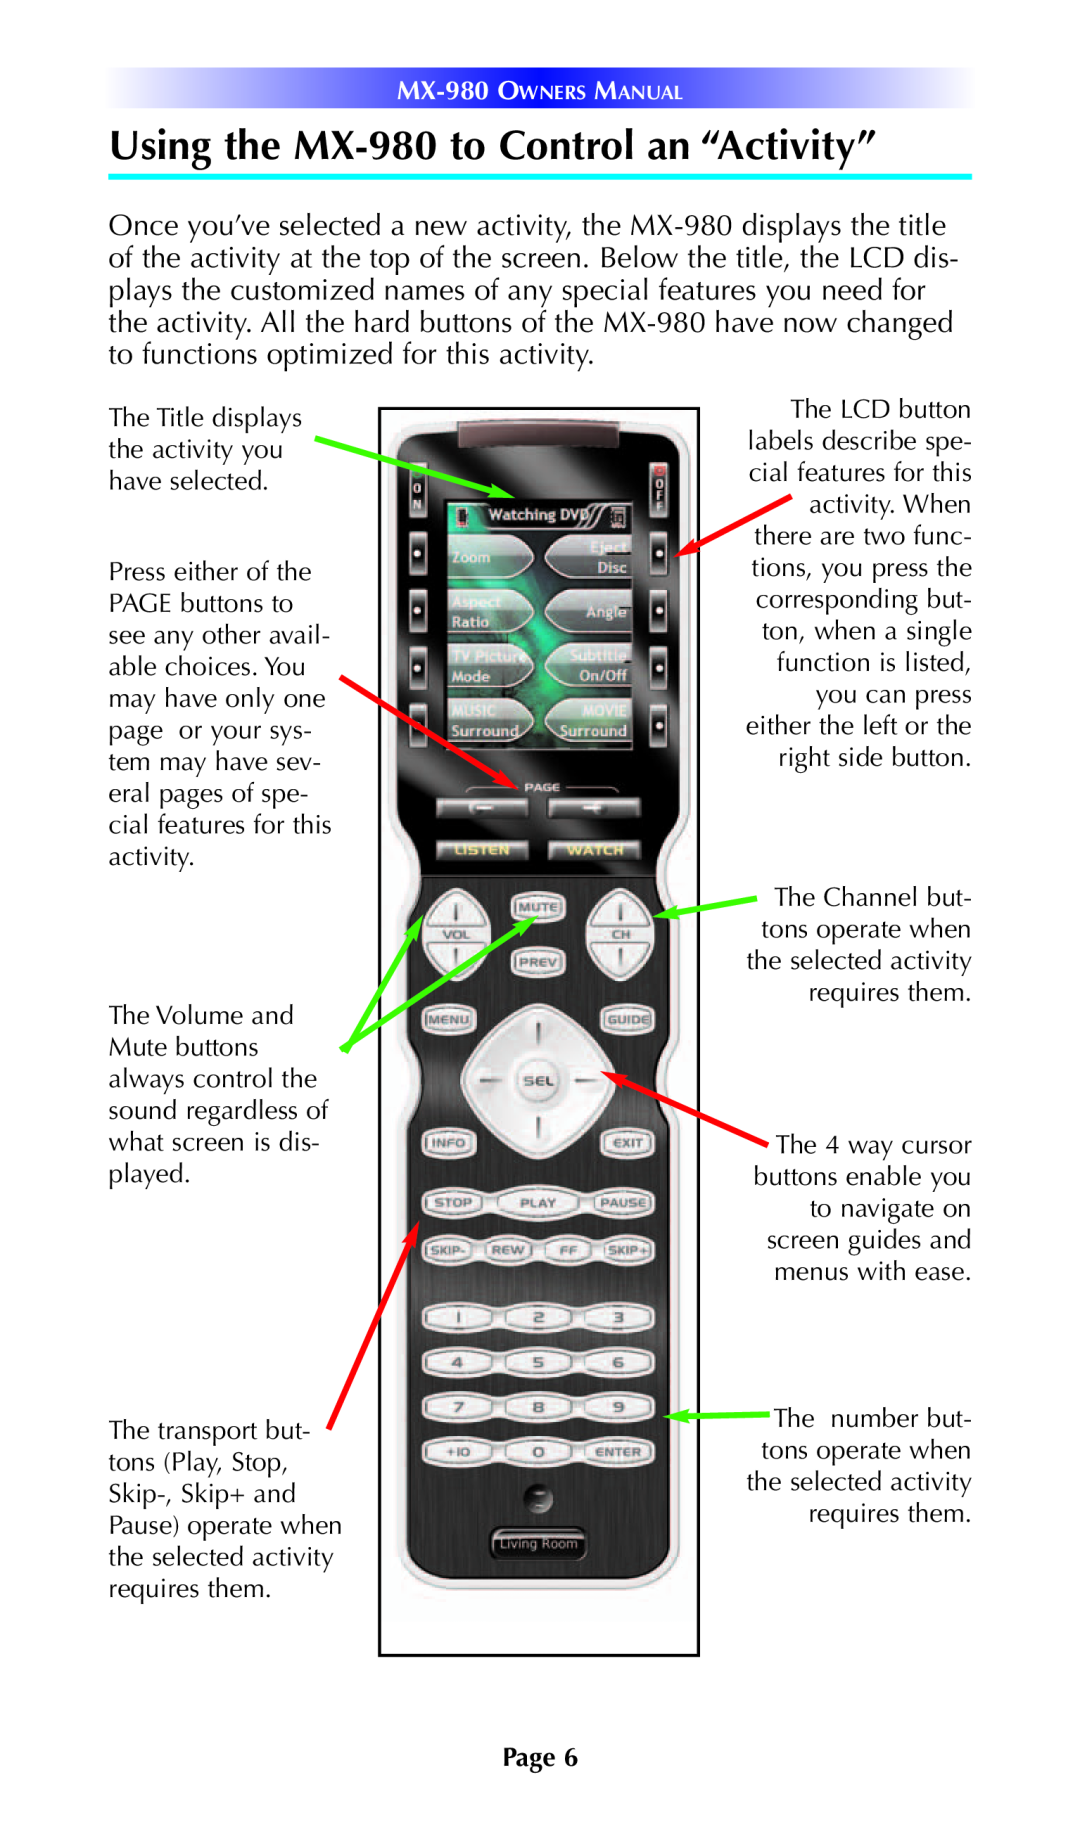 Universal Remote Control manual Using the MX-980 to Control an “Activity”, Page 